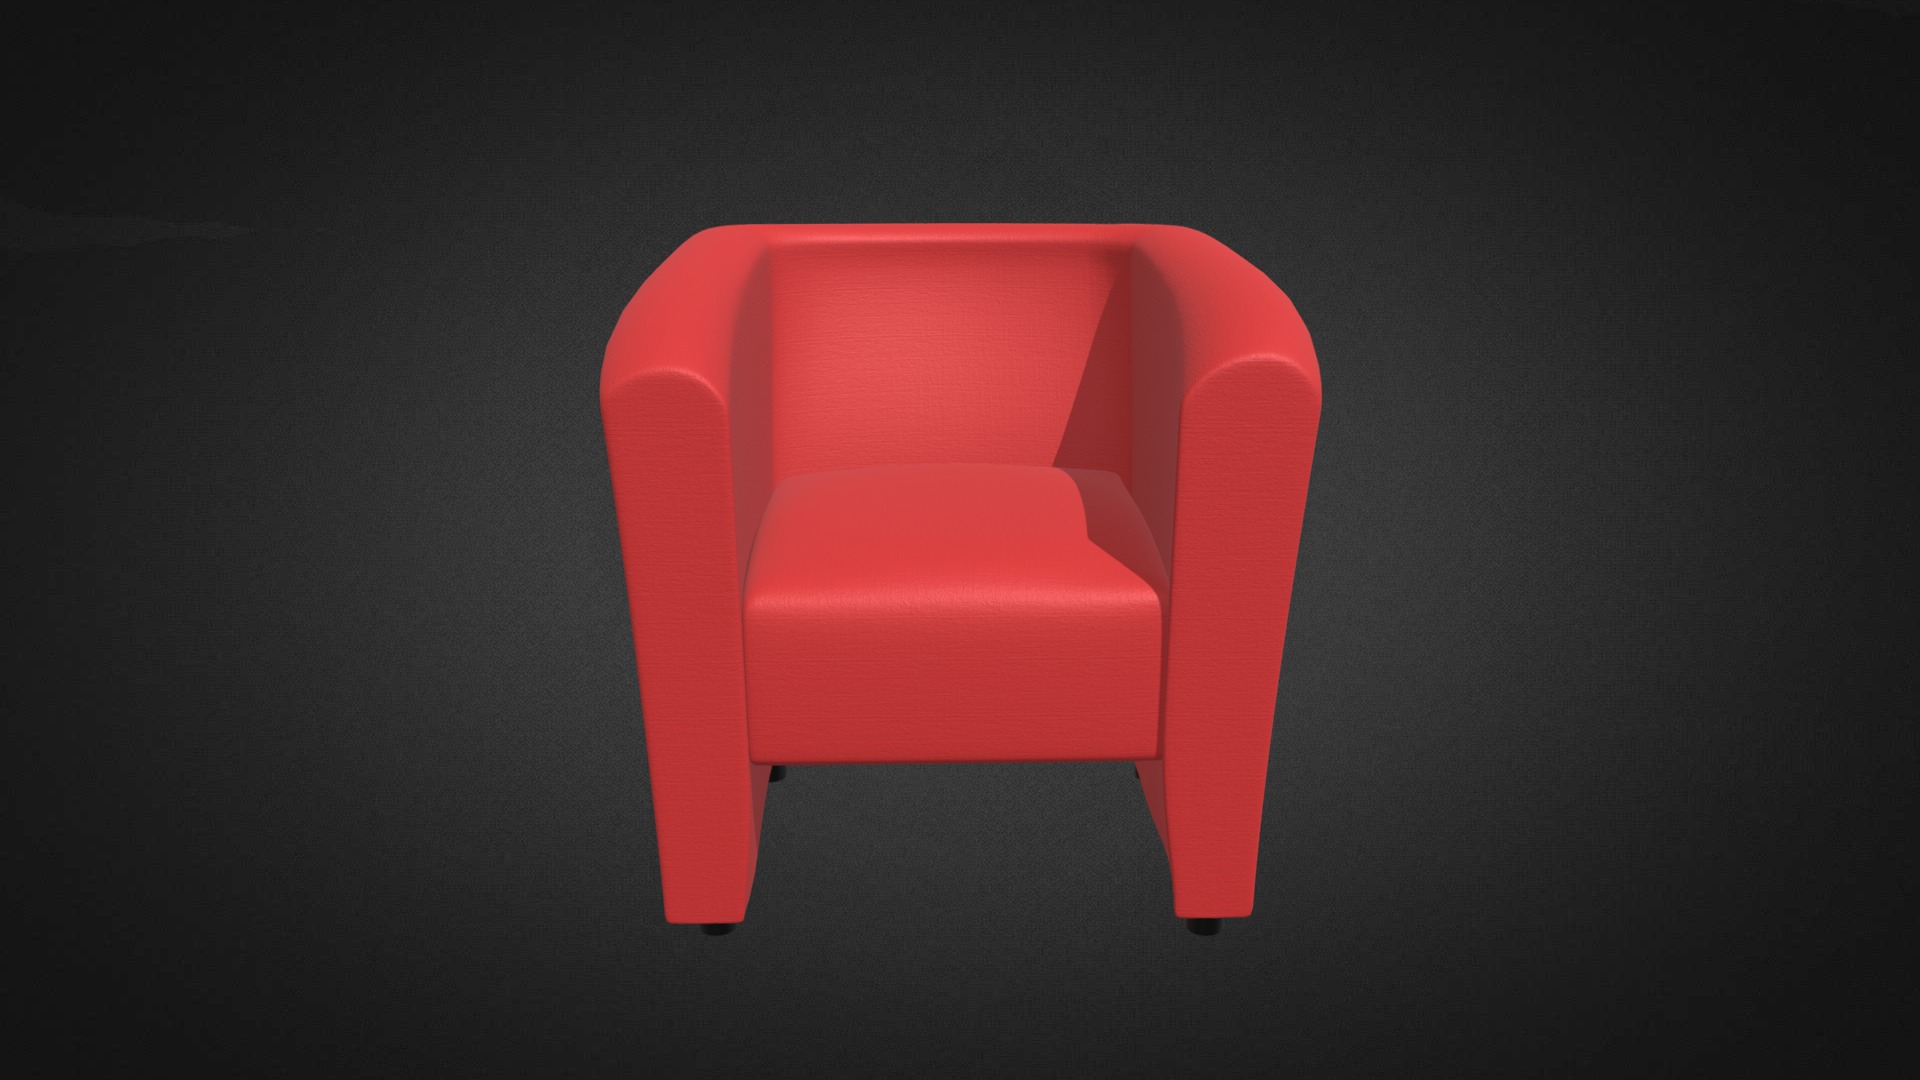 3D model Fabric Jo Jo Chair Hire - This is a 3D model of the Fabric Jo Jo Chair Hire. The 3D model is about a red square with a black background.